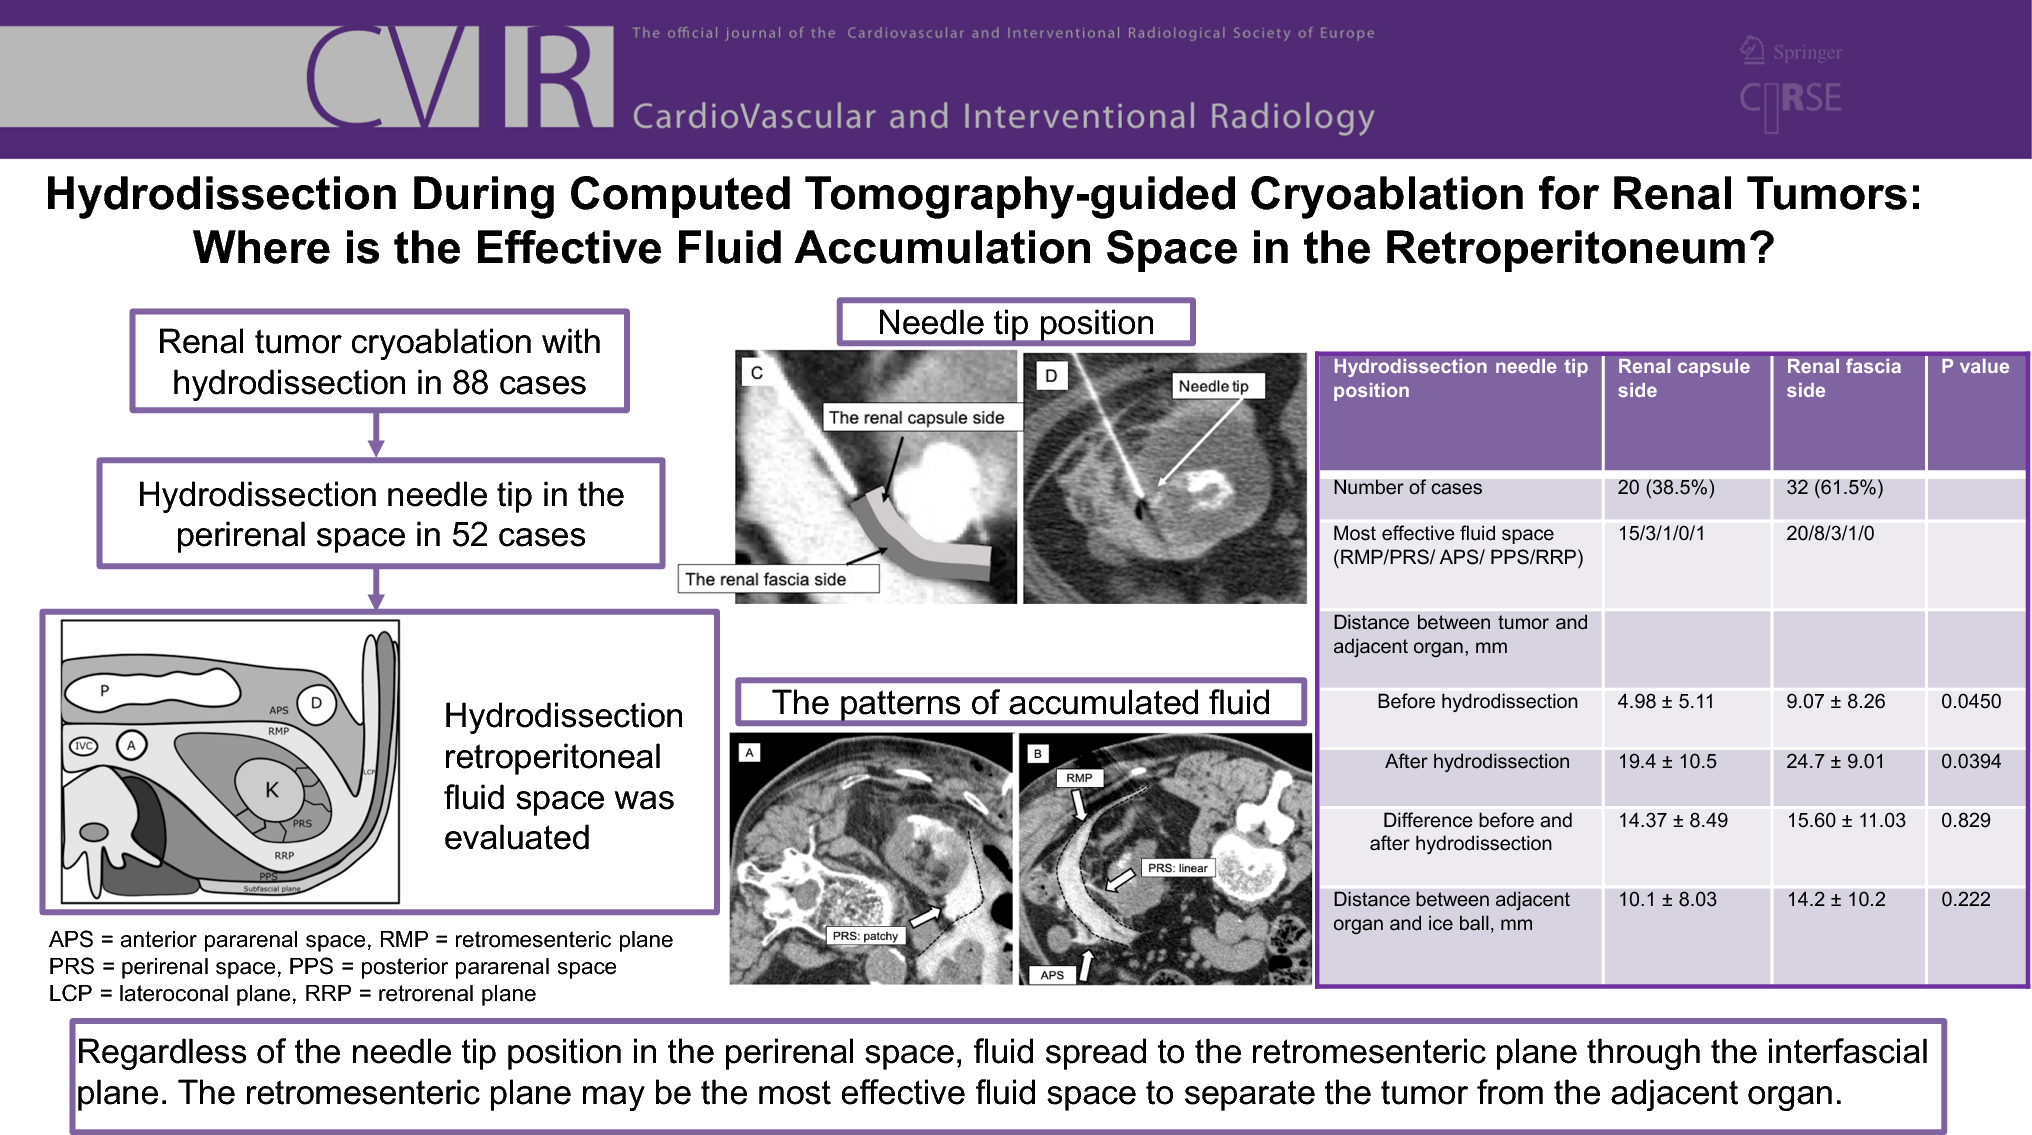 Hydrodissection During Computed Tomography-Guided Cryoablation for Renal Tumors: Where is the Effective Fluid Accumulation Space in the Retroperitoneum?